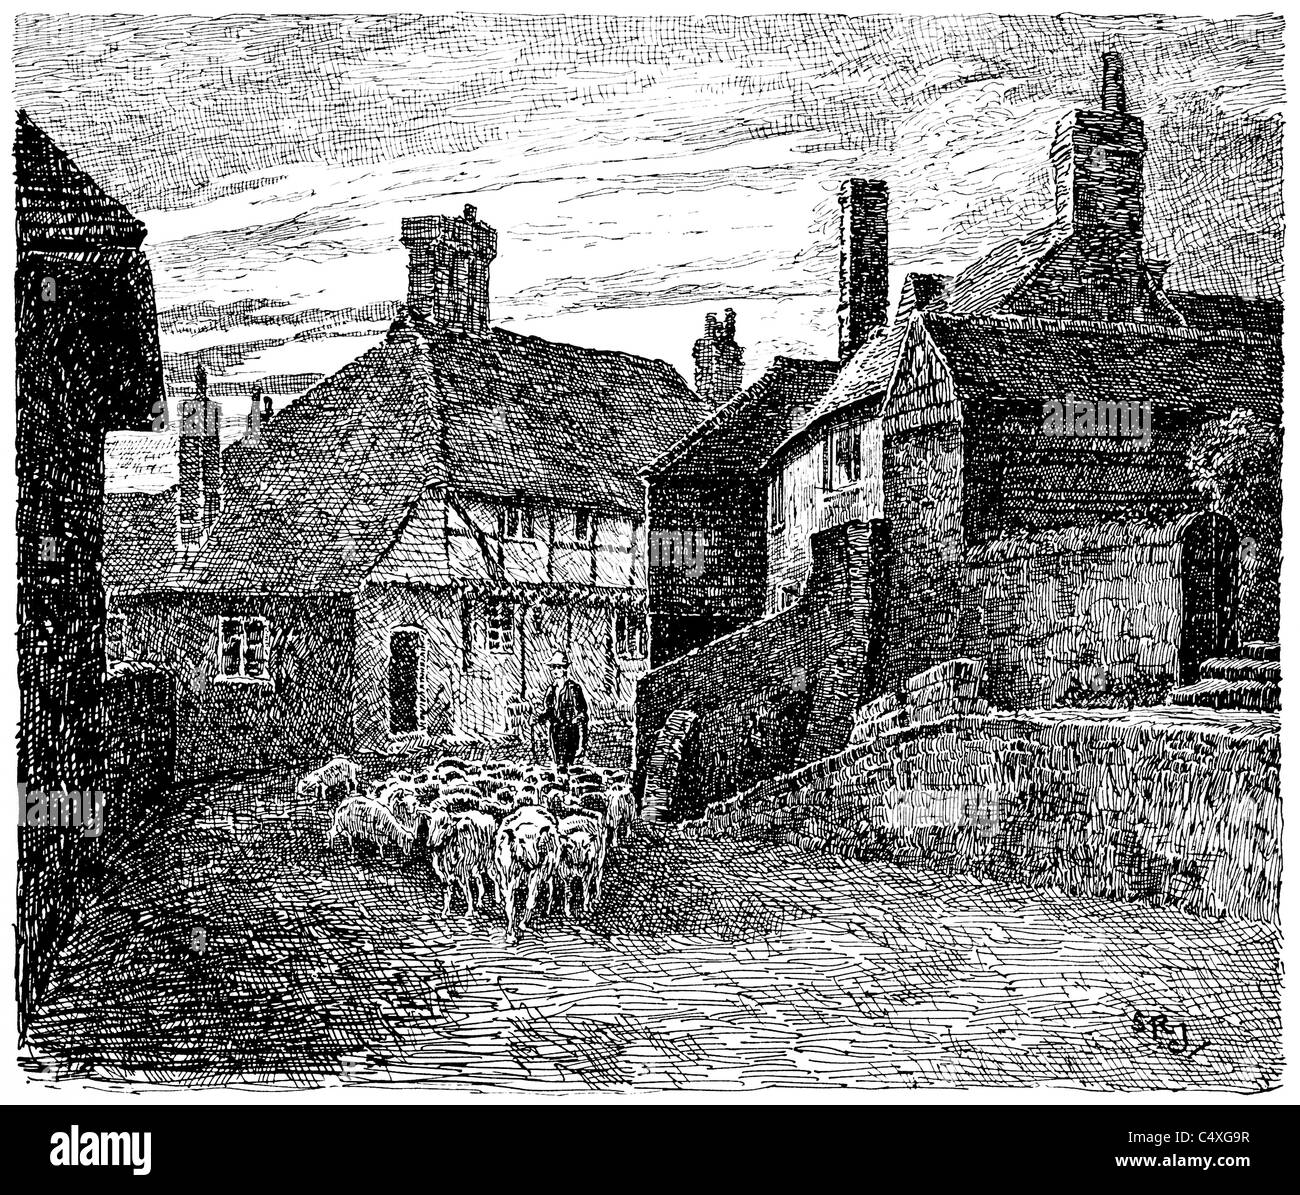 Byworth, Sussex - pen and ink illustration from 'Old English Country Cottages' by Charles Holme, 1906. Stock Photo